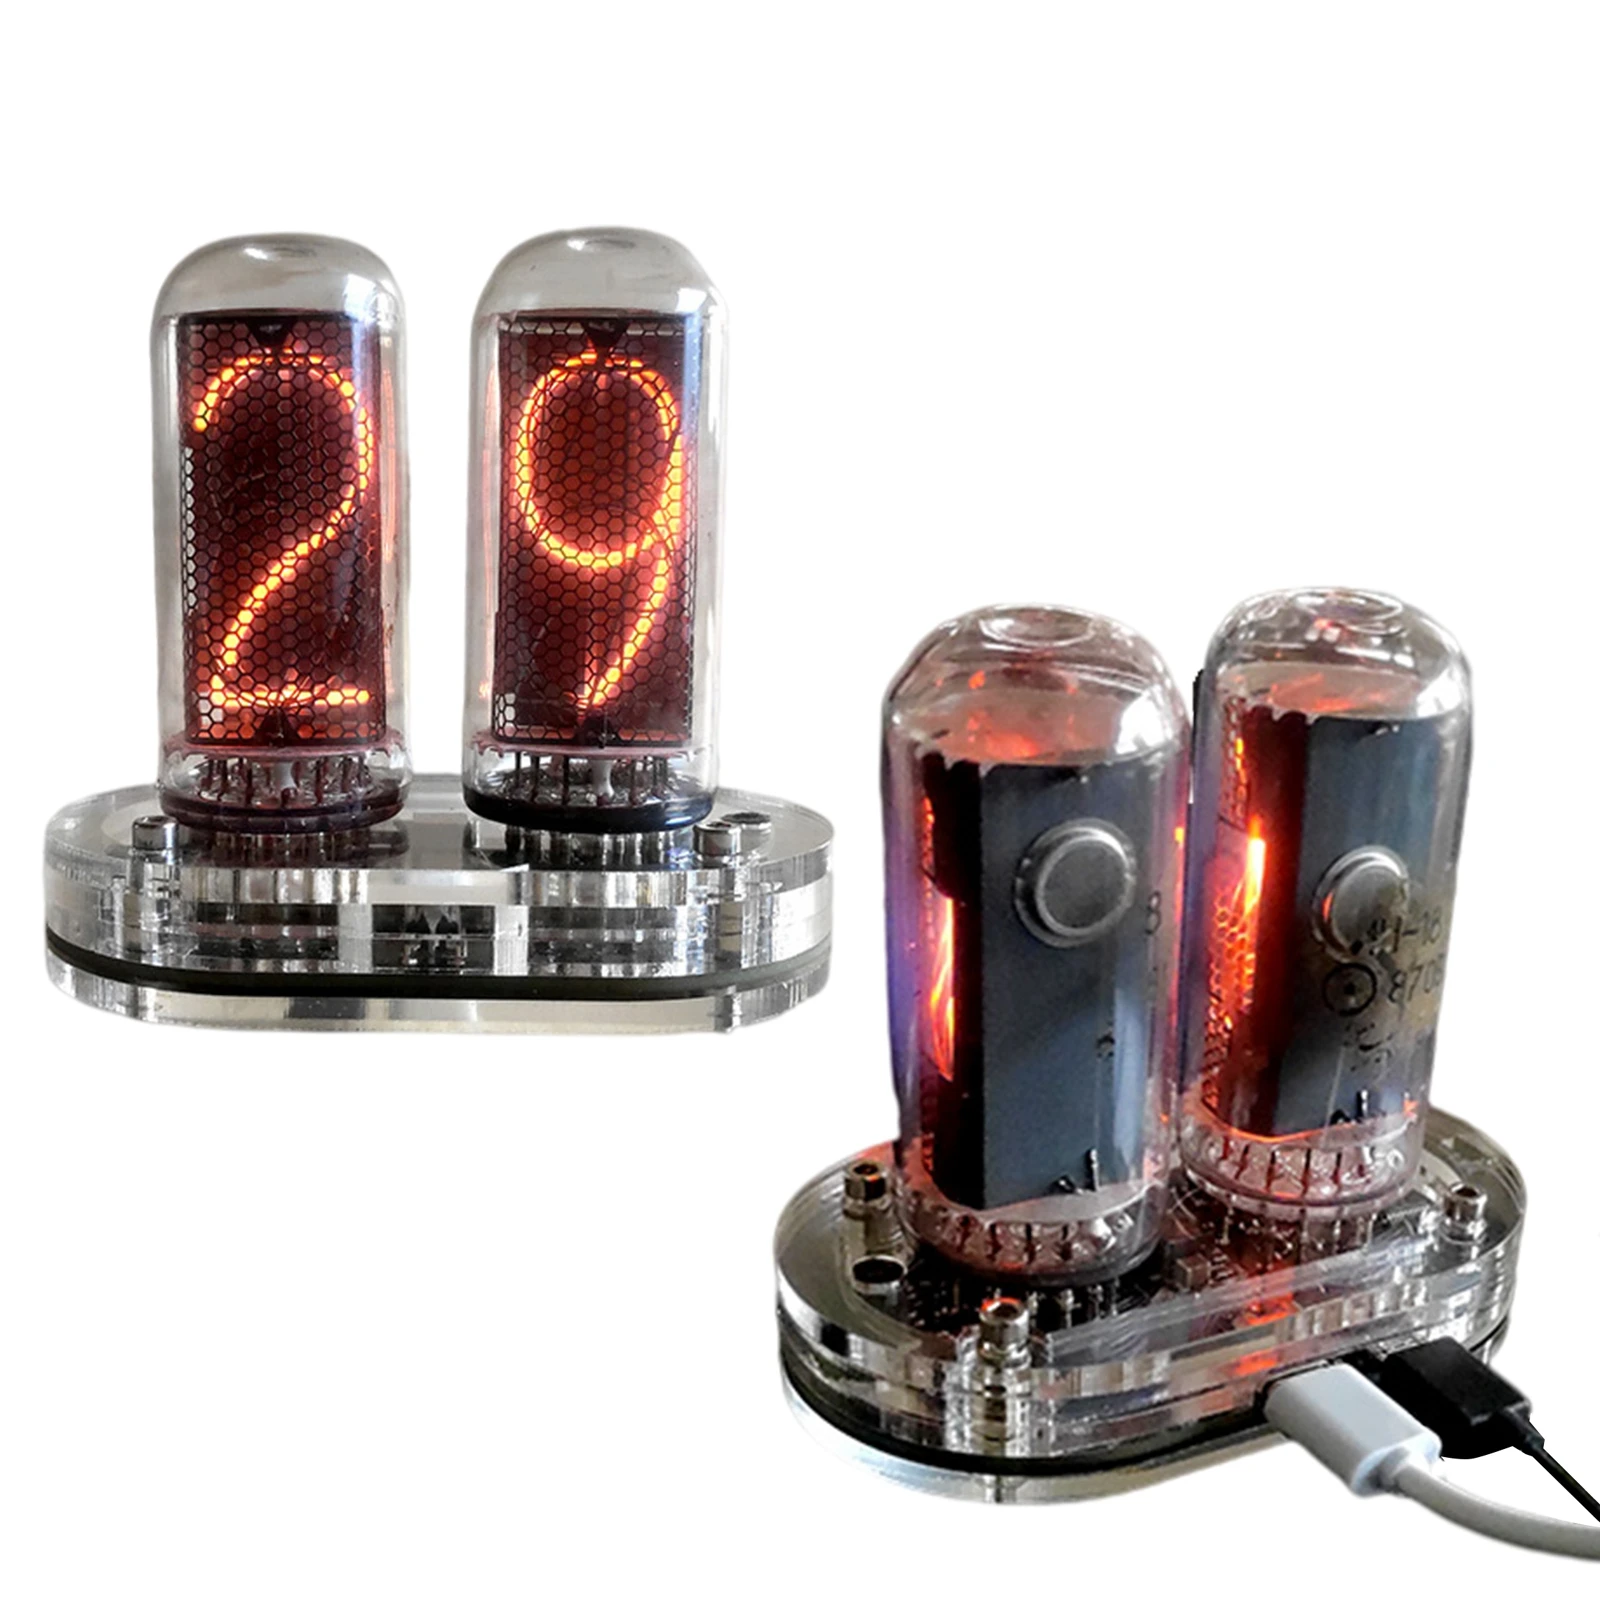 

2-digit IN-18 Glow Tube thermometer IN18 Nixie Clock Home gift Desktop Audio Accessories Handicrafts Home Furnishings